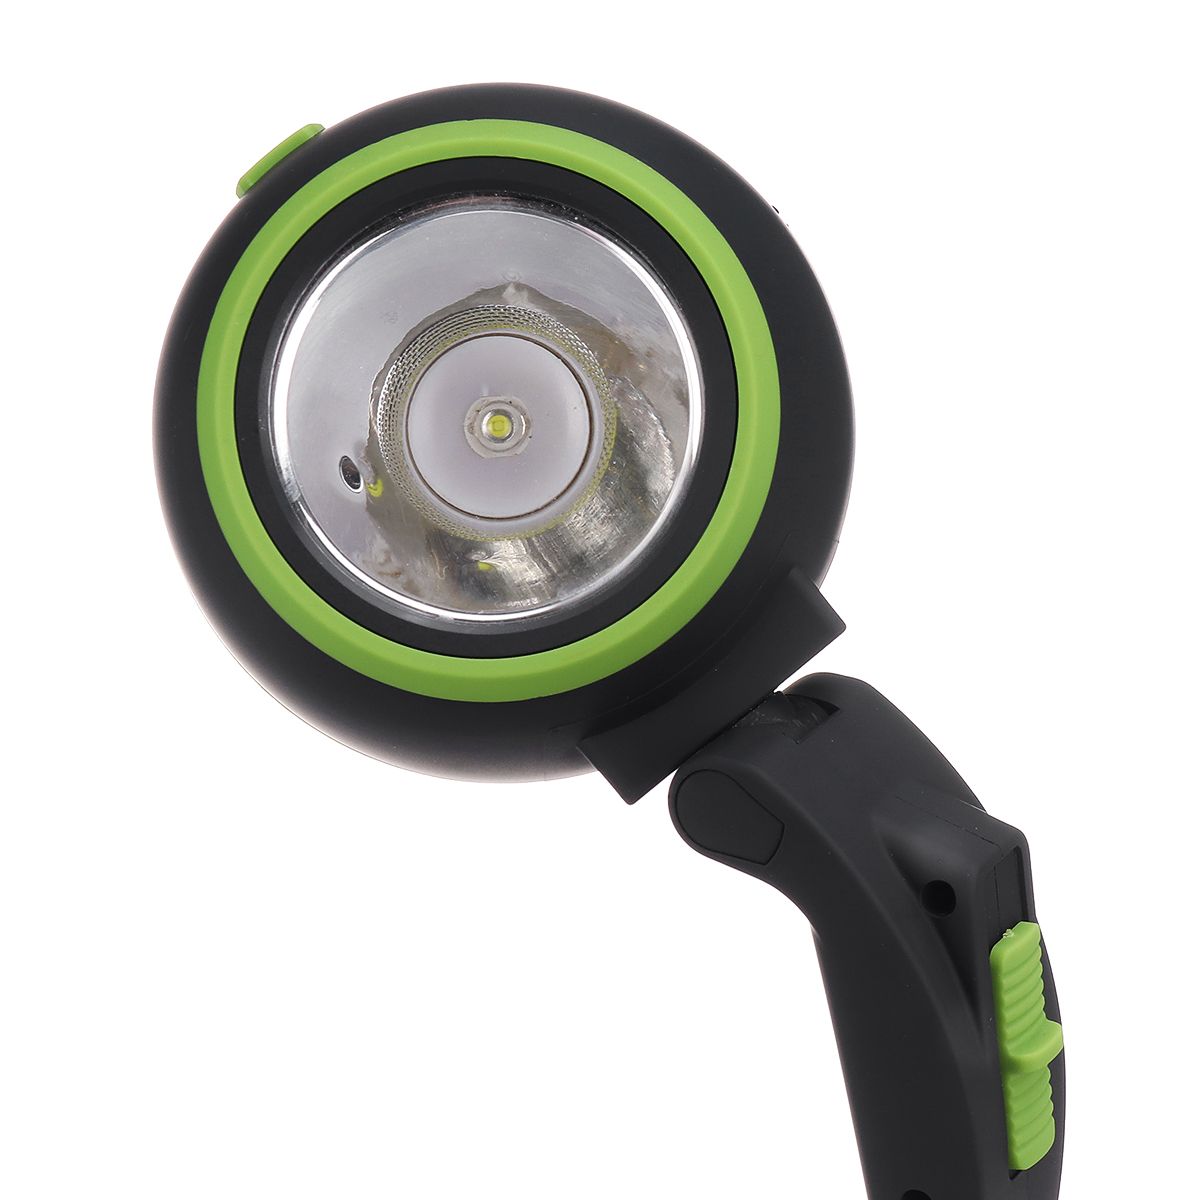 3-in-1-USB-Rechargeable-Outdoor-Camping-Tent-Light-LED-Searchlight-Reading-Lamp-1742403